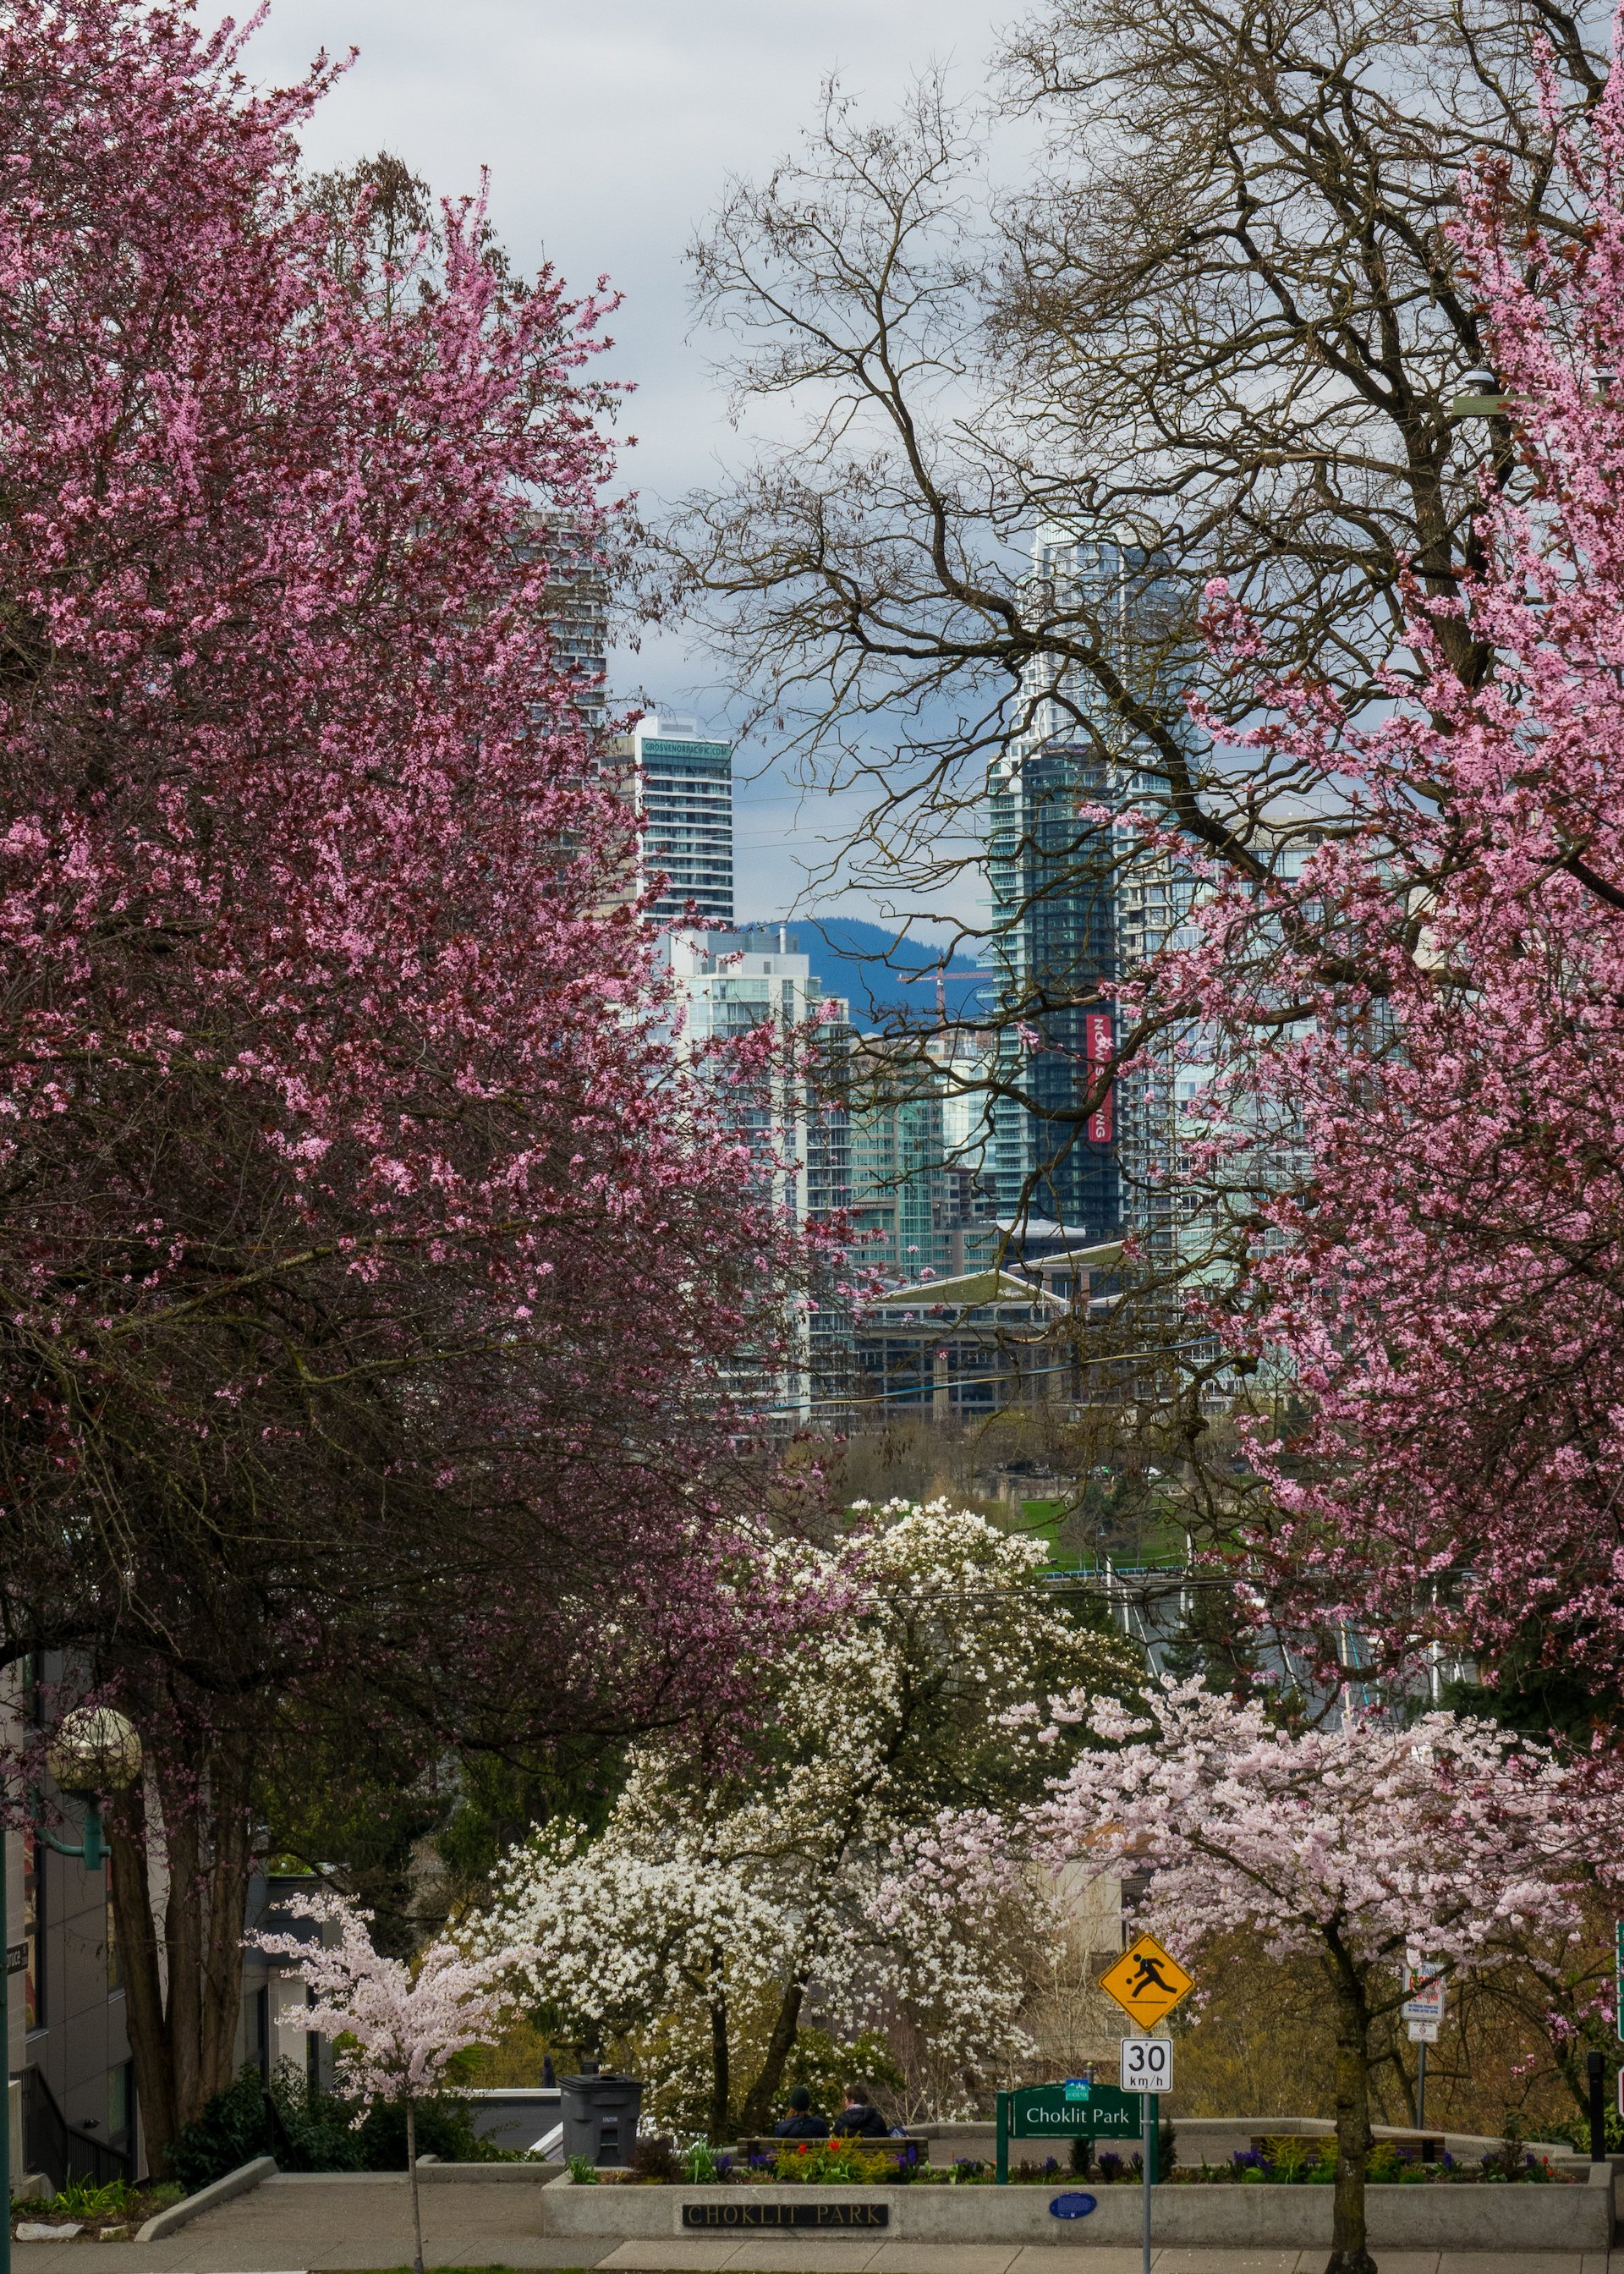  Choklit Park on 7th, about a block from the house has an amazing view of the city with lots of early blossoms. 